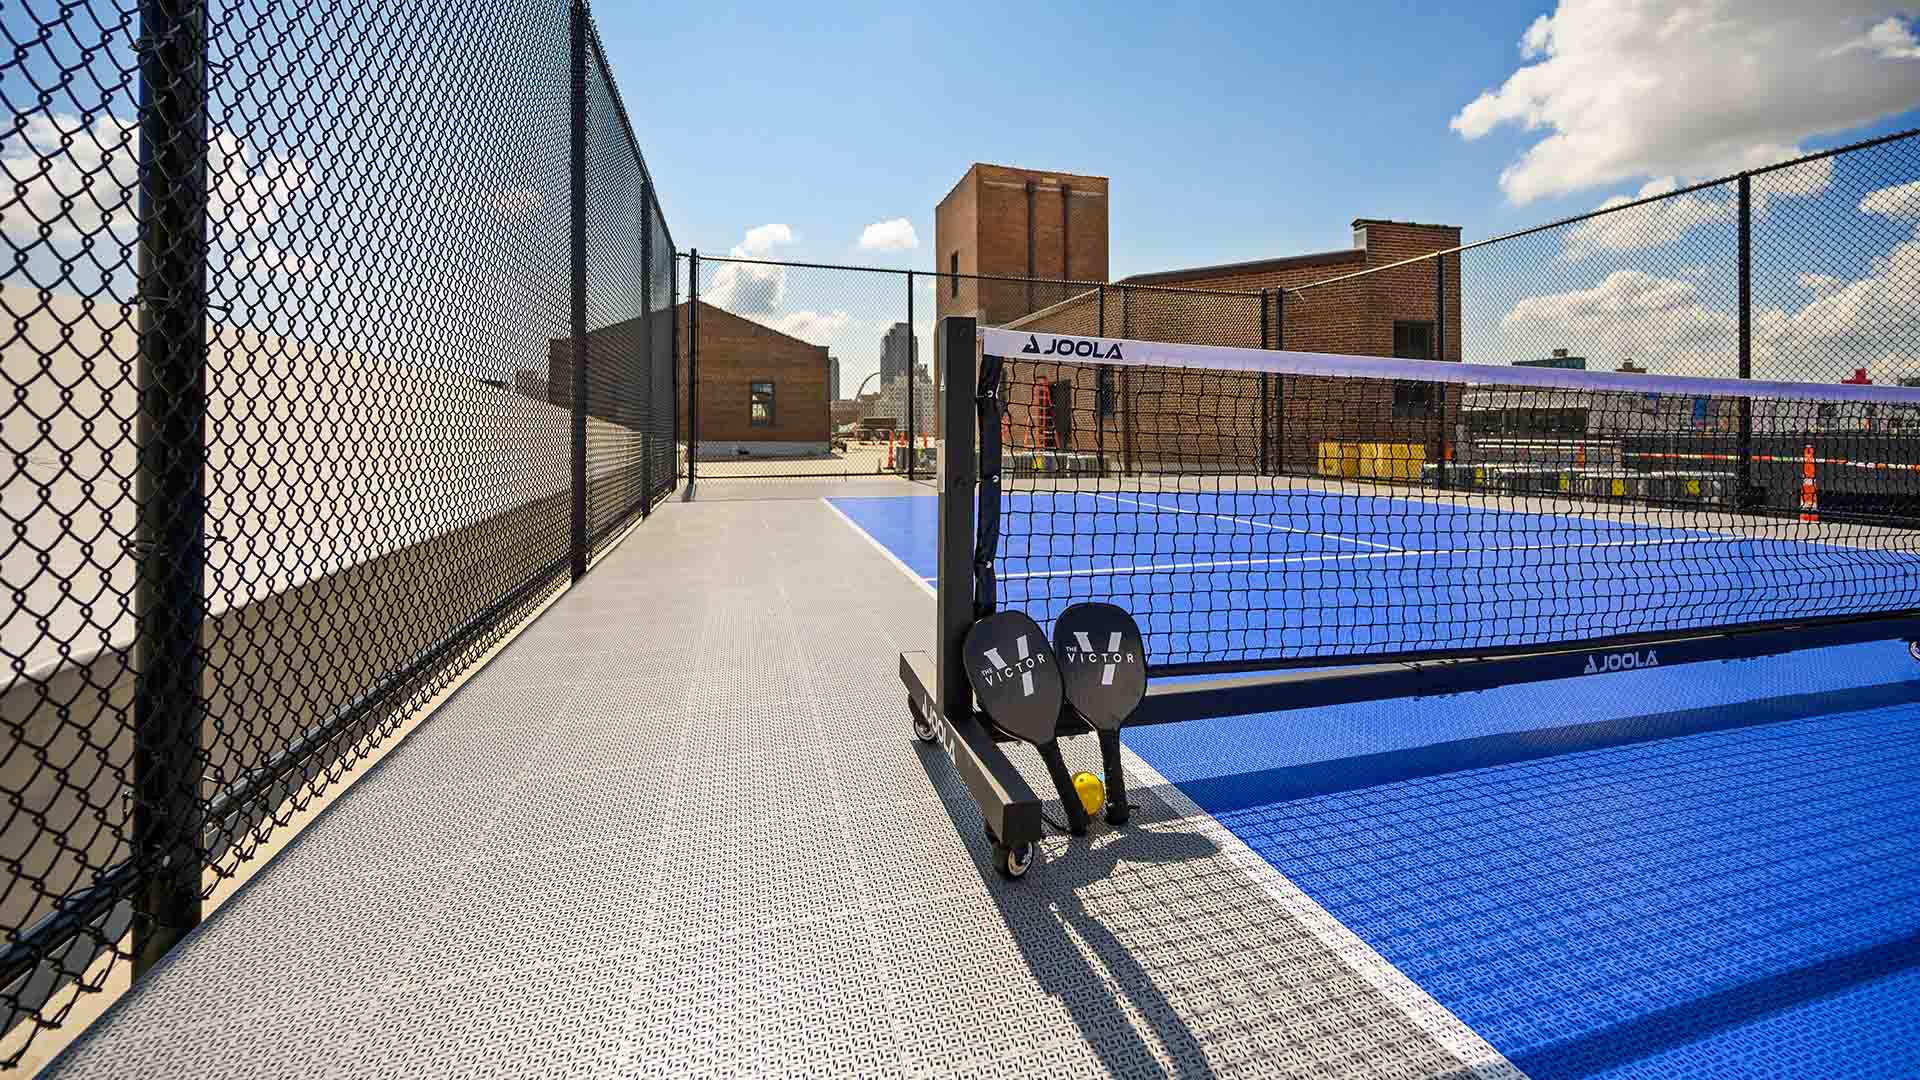 Rooftop pickleball court with large metal fence.